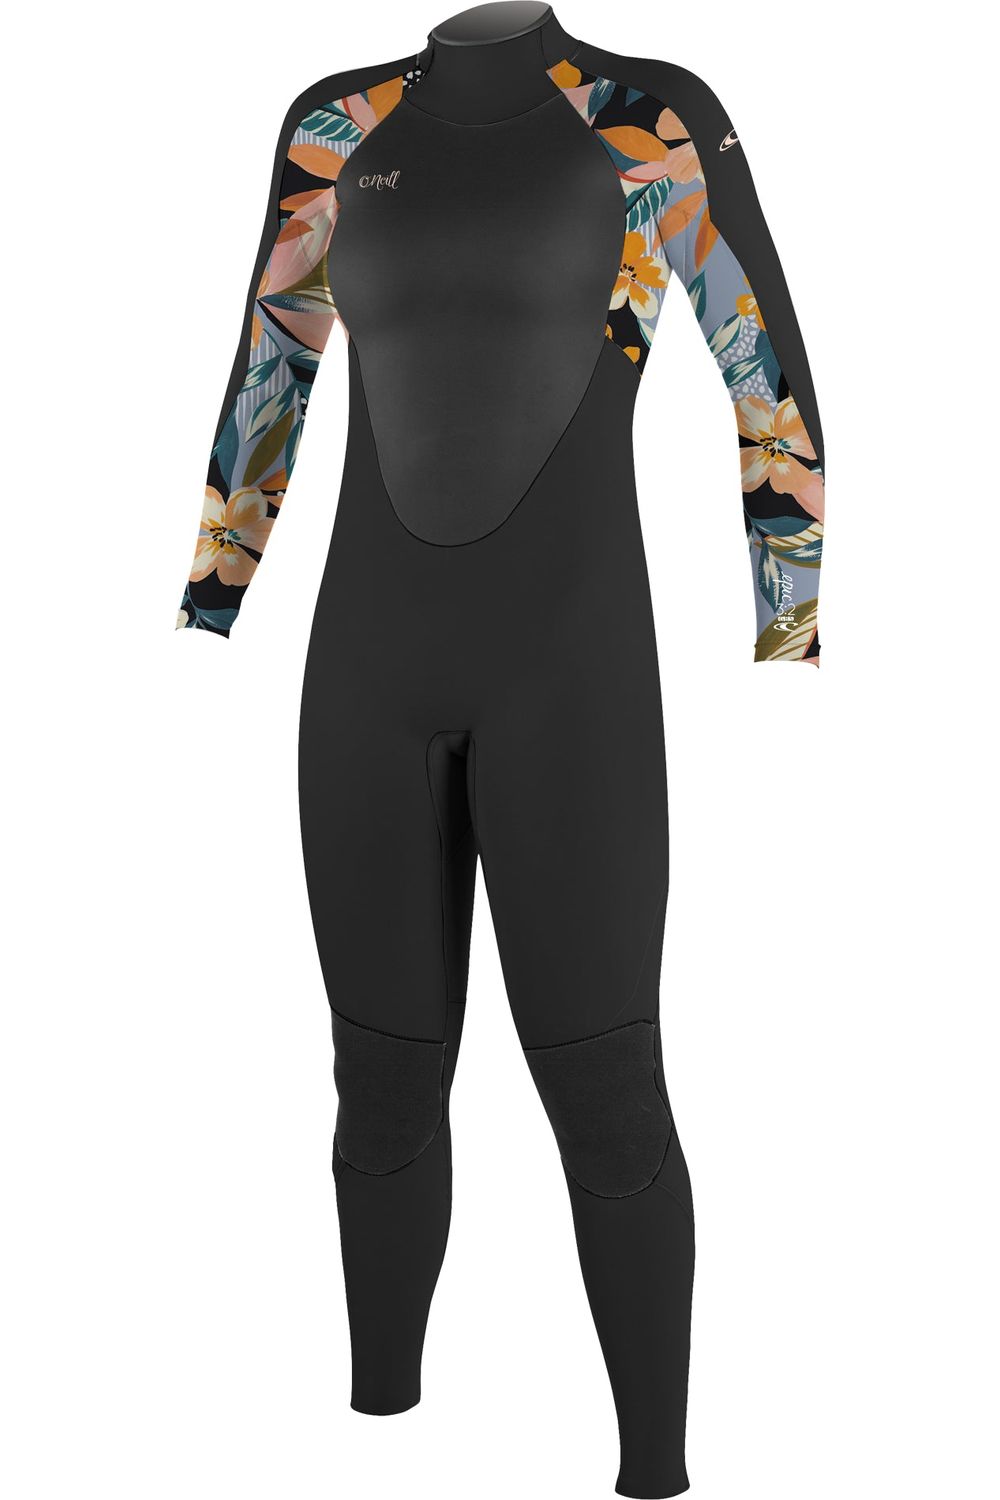 O'Neill Epic Women's Wetsuit 3/2 With Back Zip in Black & Demiflor